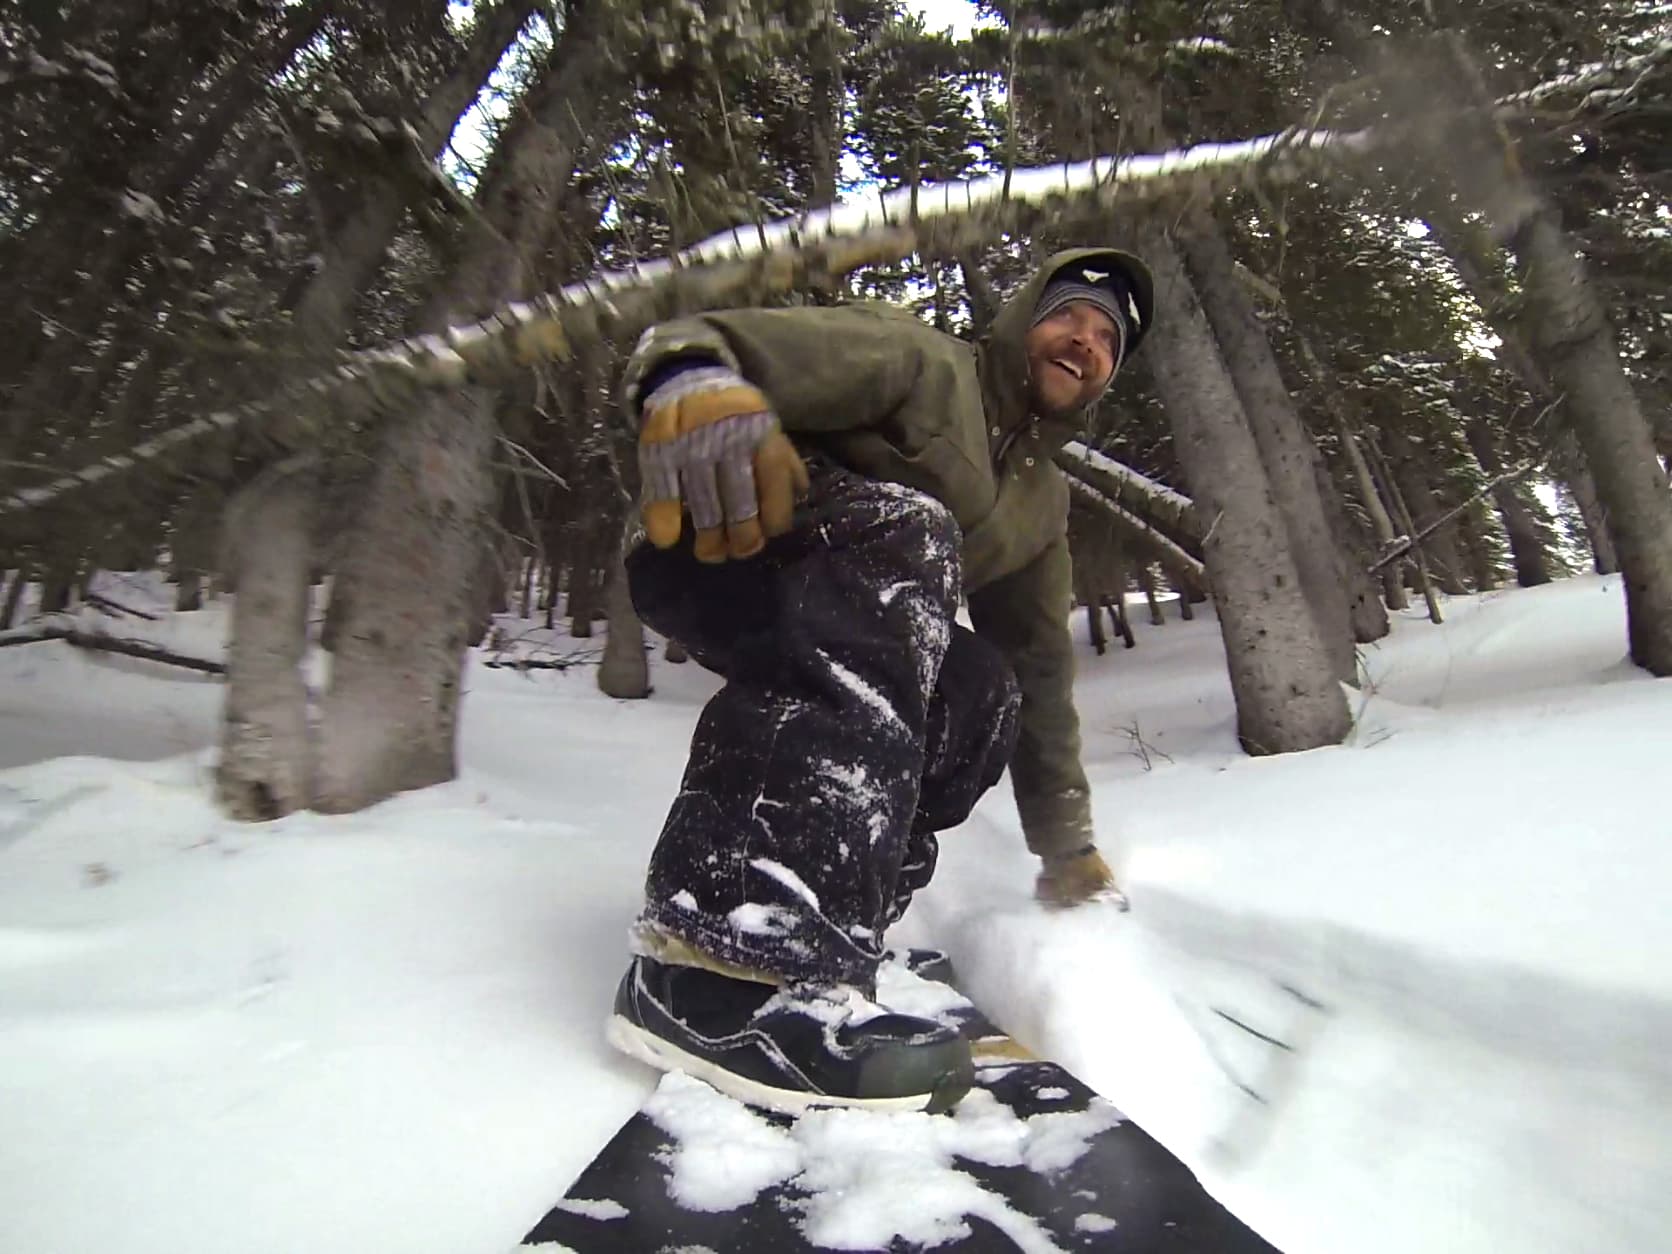 Brandon Saunders getting low on his grassroots powsurfer.